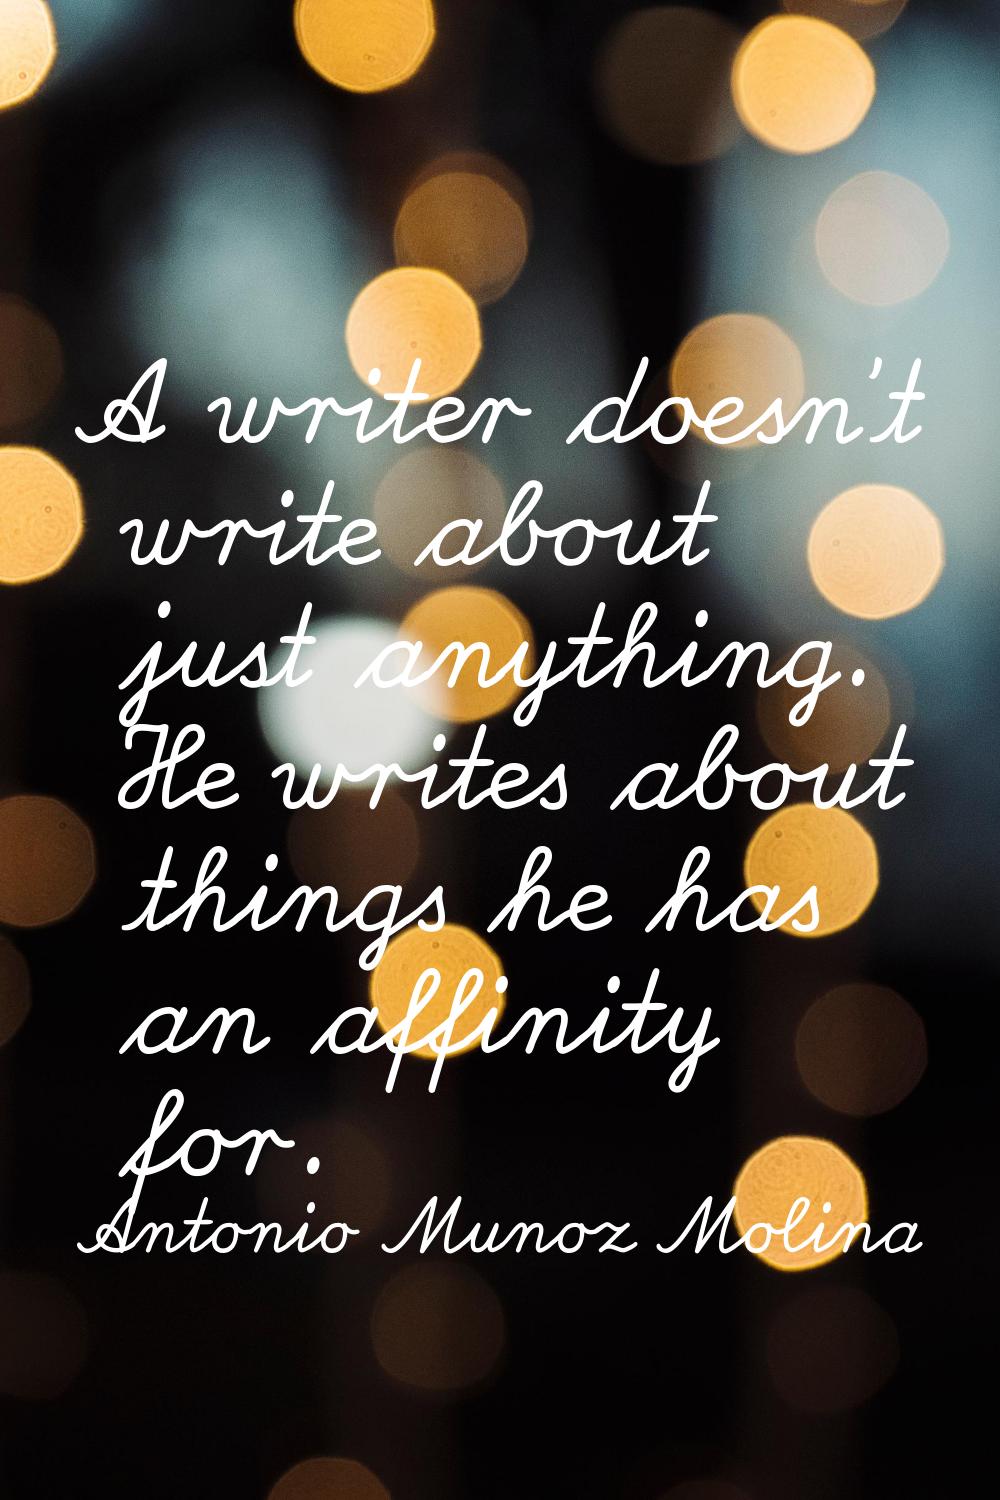 A writer doesn't write about just anything. He writes about things he has an affinity for.